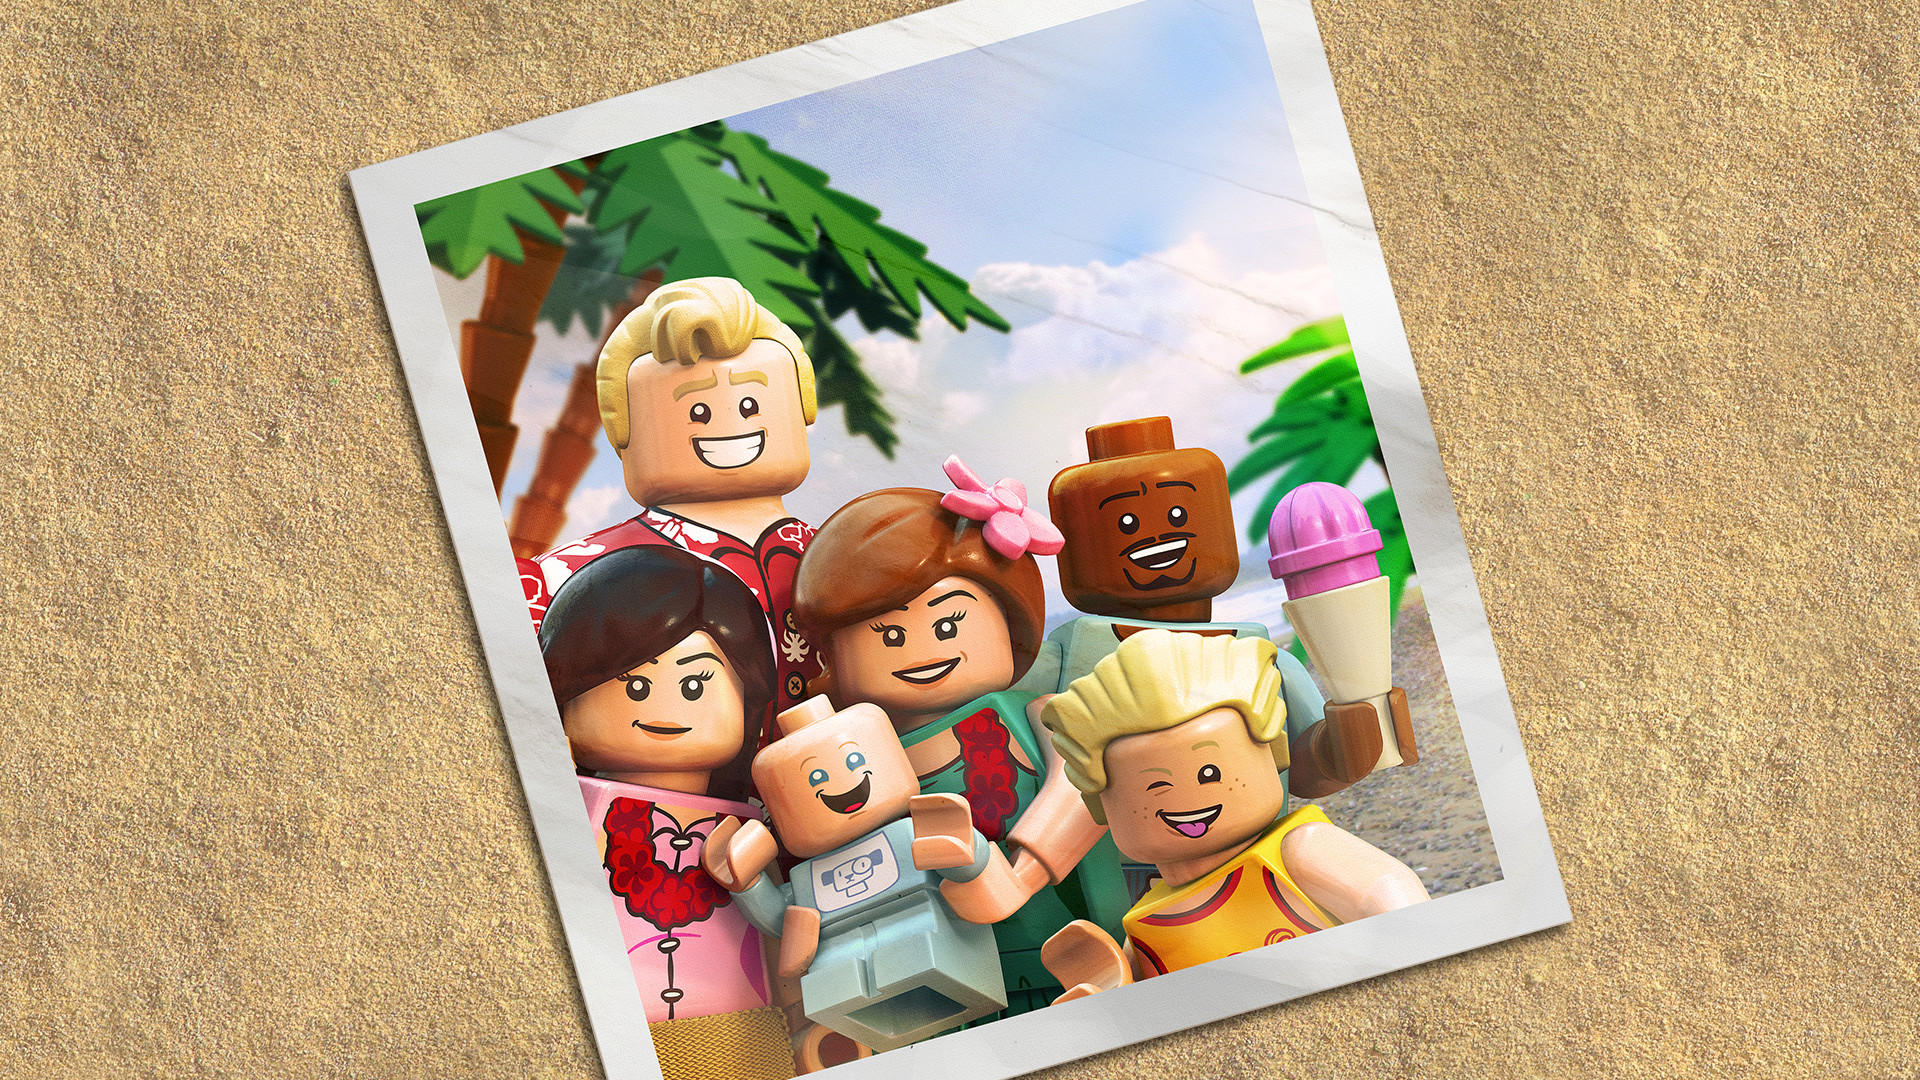 LEGO THE INCREDIBLES - Parr Family Vacation Character Pack DLC EU PS4 CD Key [$ 1.12]